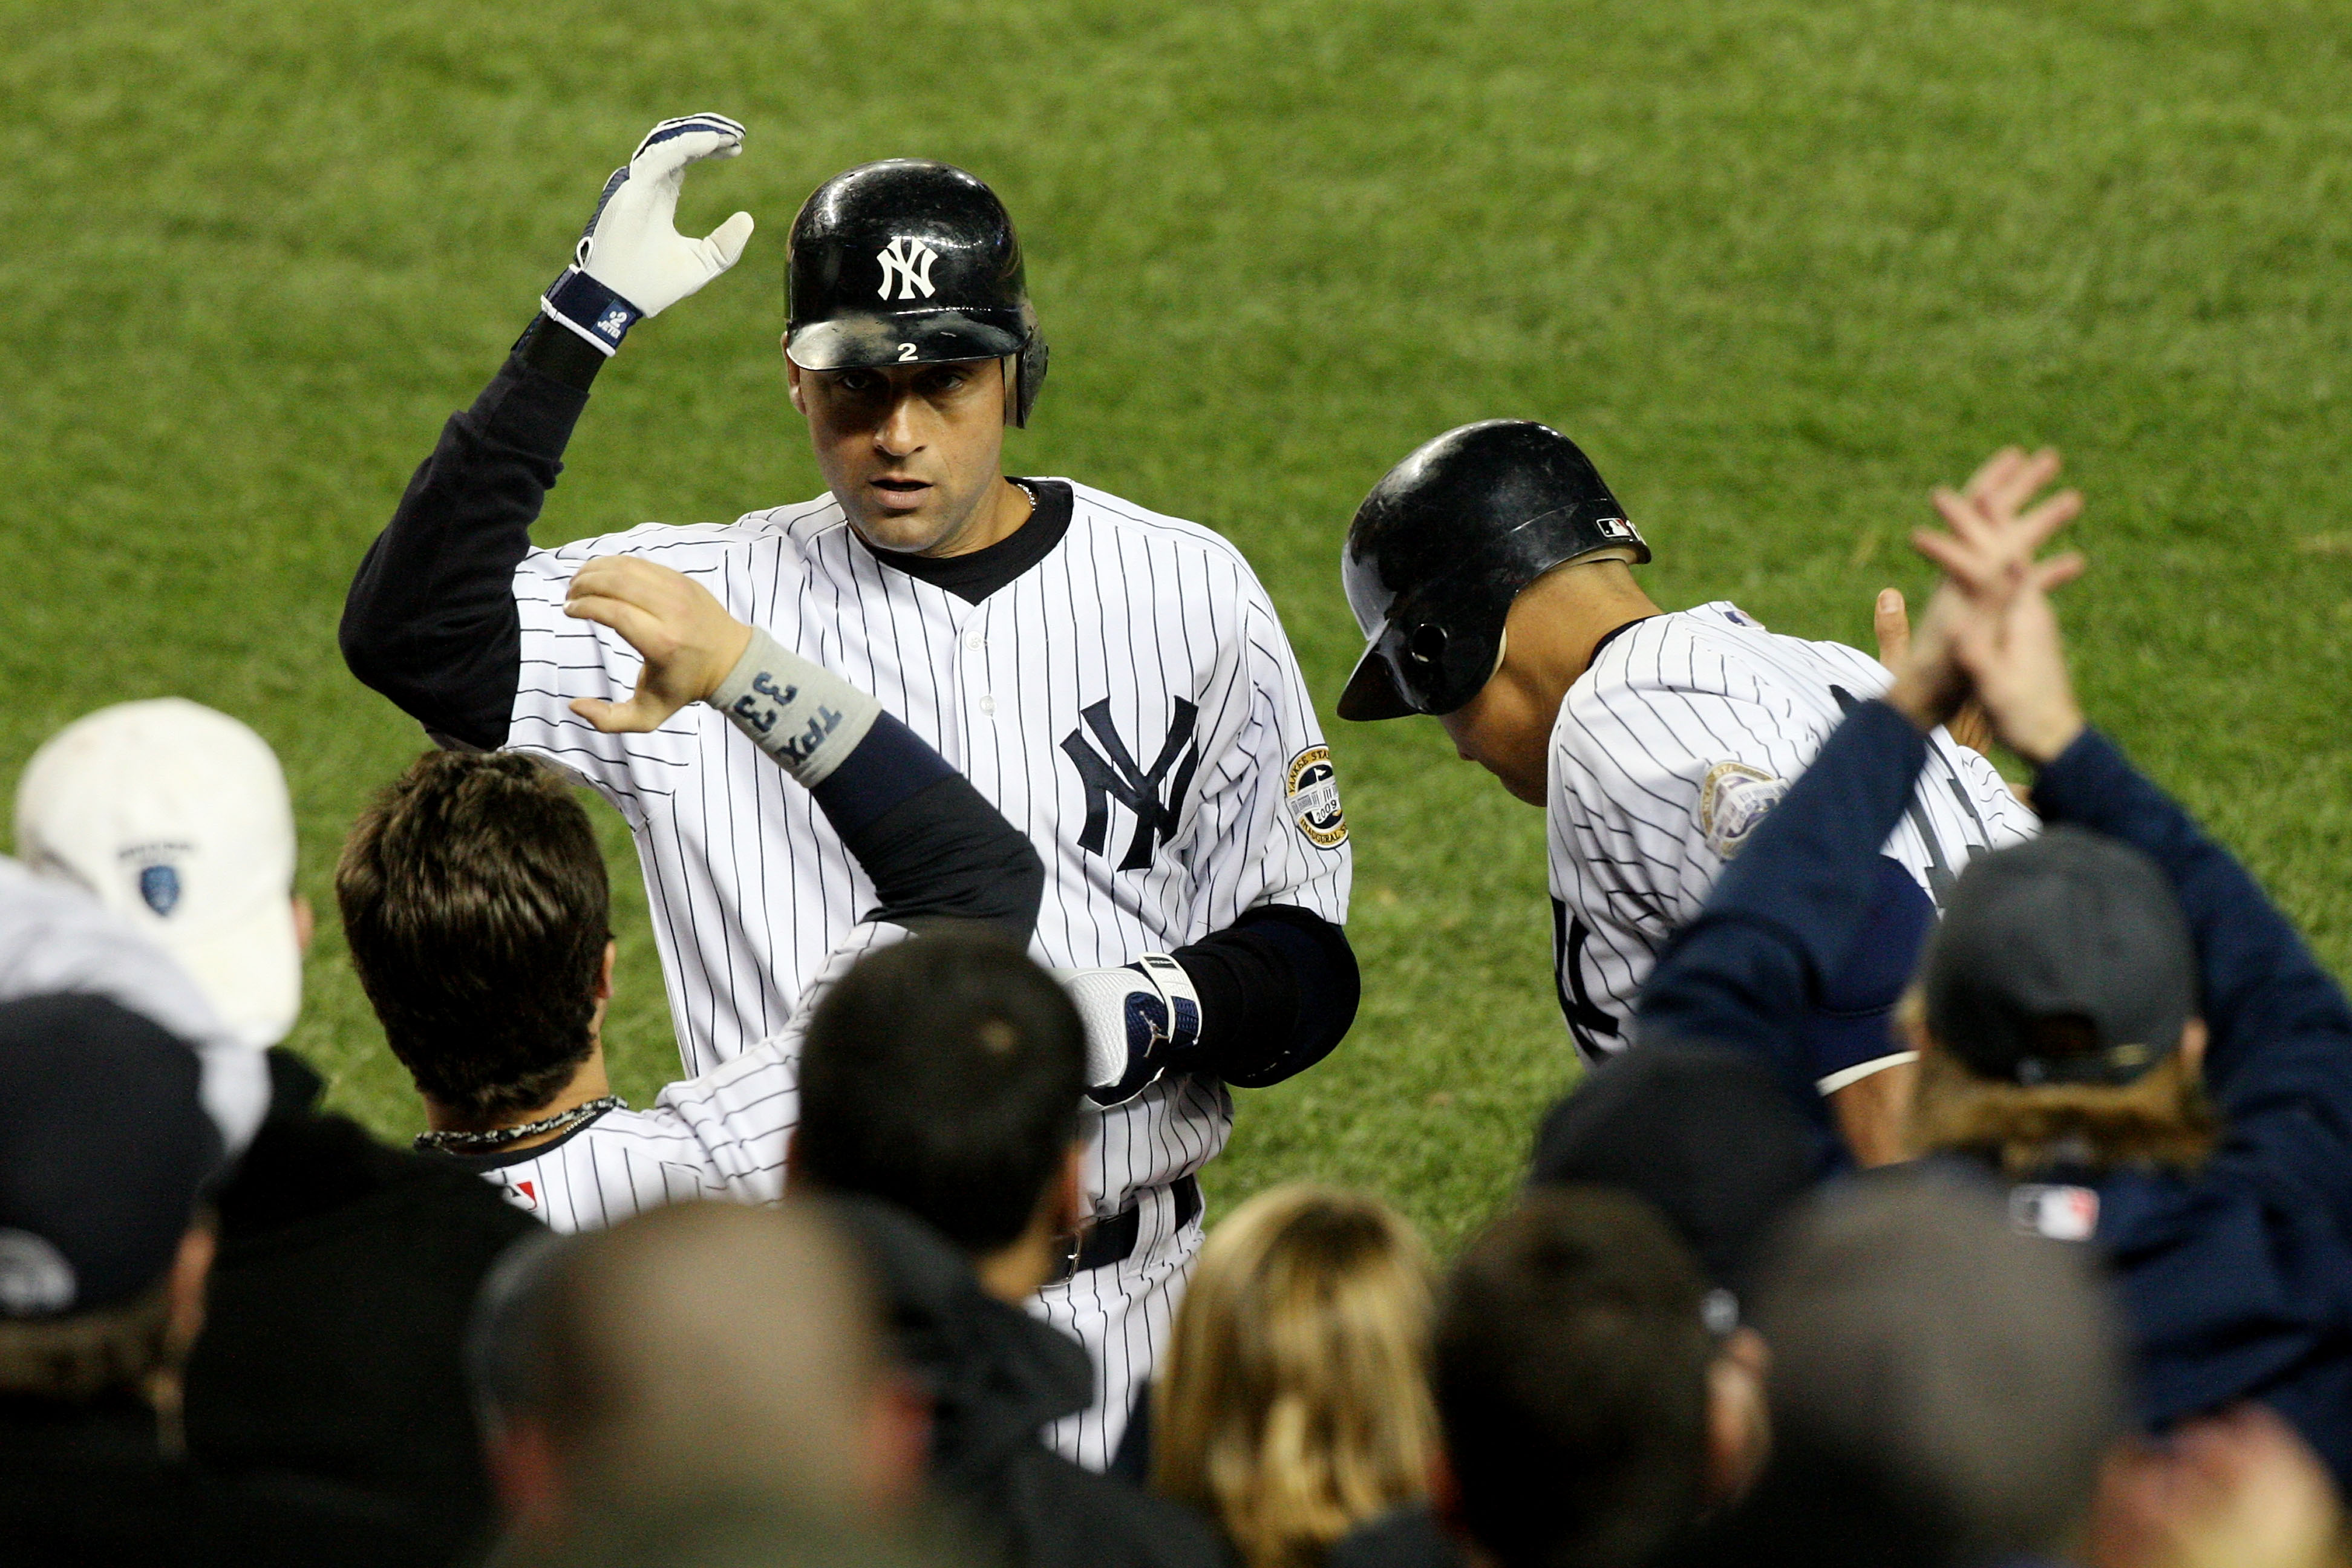 Derek Jeter is congratulated by Nick Swisher after hitting a solo home run in the bottom of the third inning against the Los Angeles Angels in Game 2 of the 2009 ALCS.  (Photo by Jim McIsaac/Getty Images)